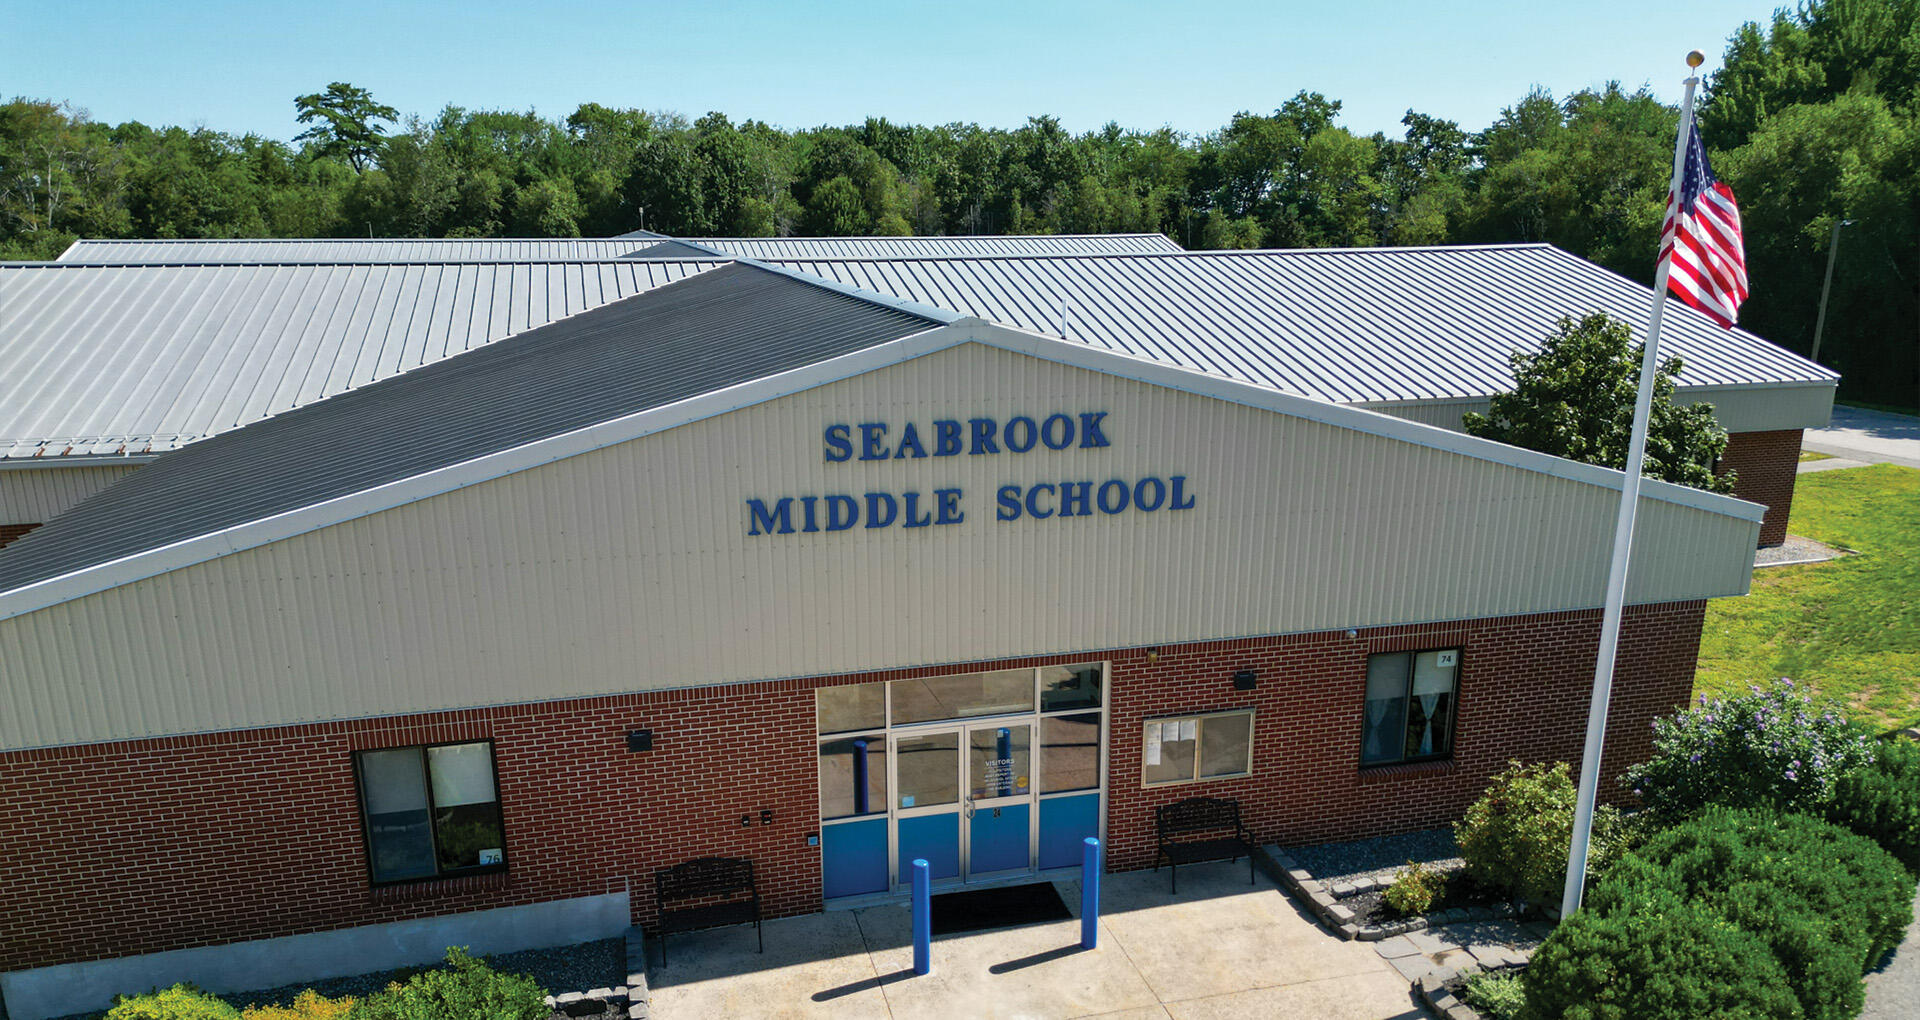 Image showing the front of Seabrook Middle School